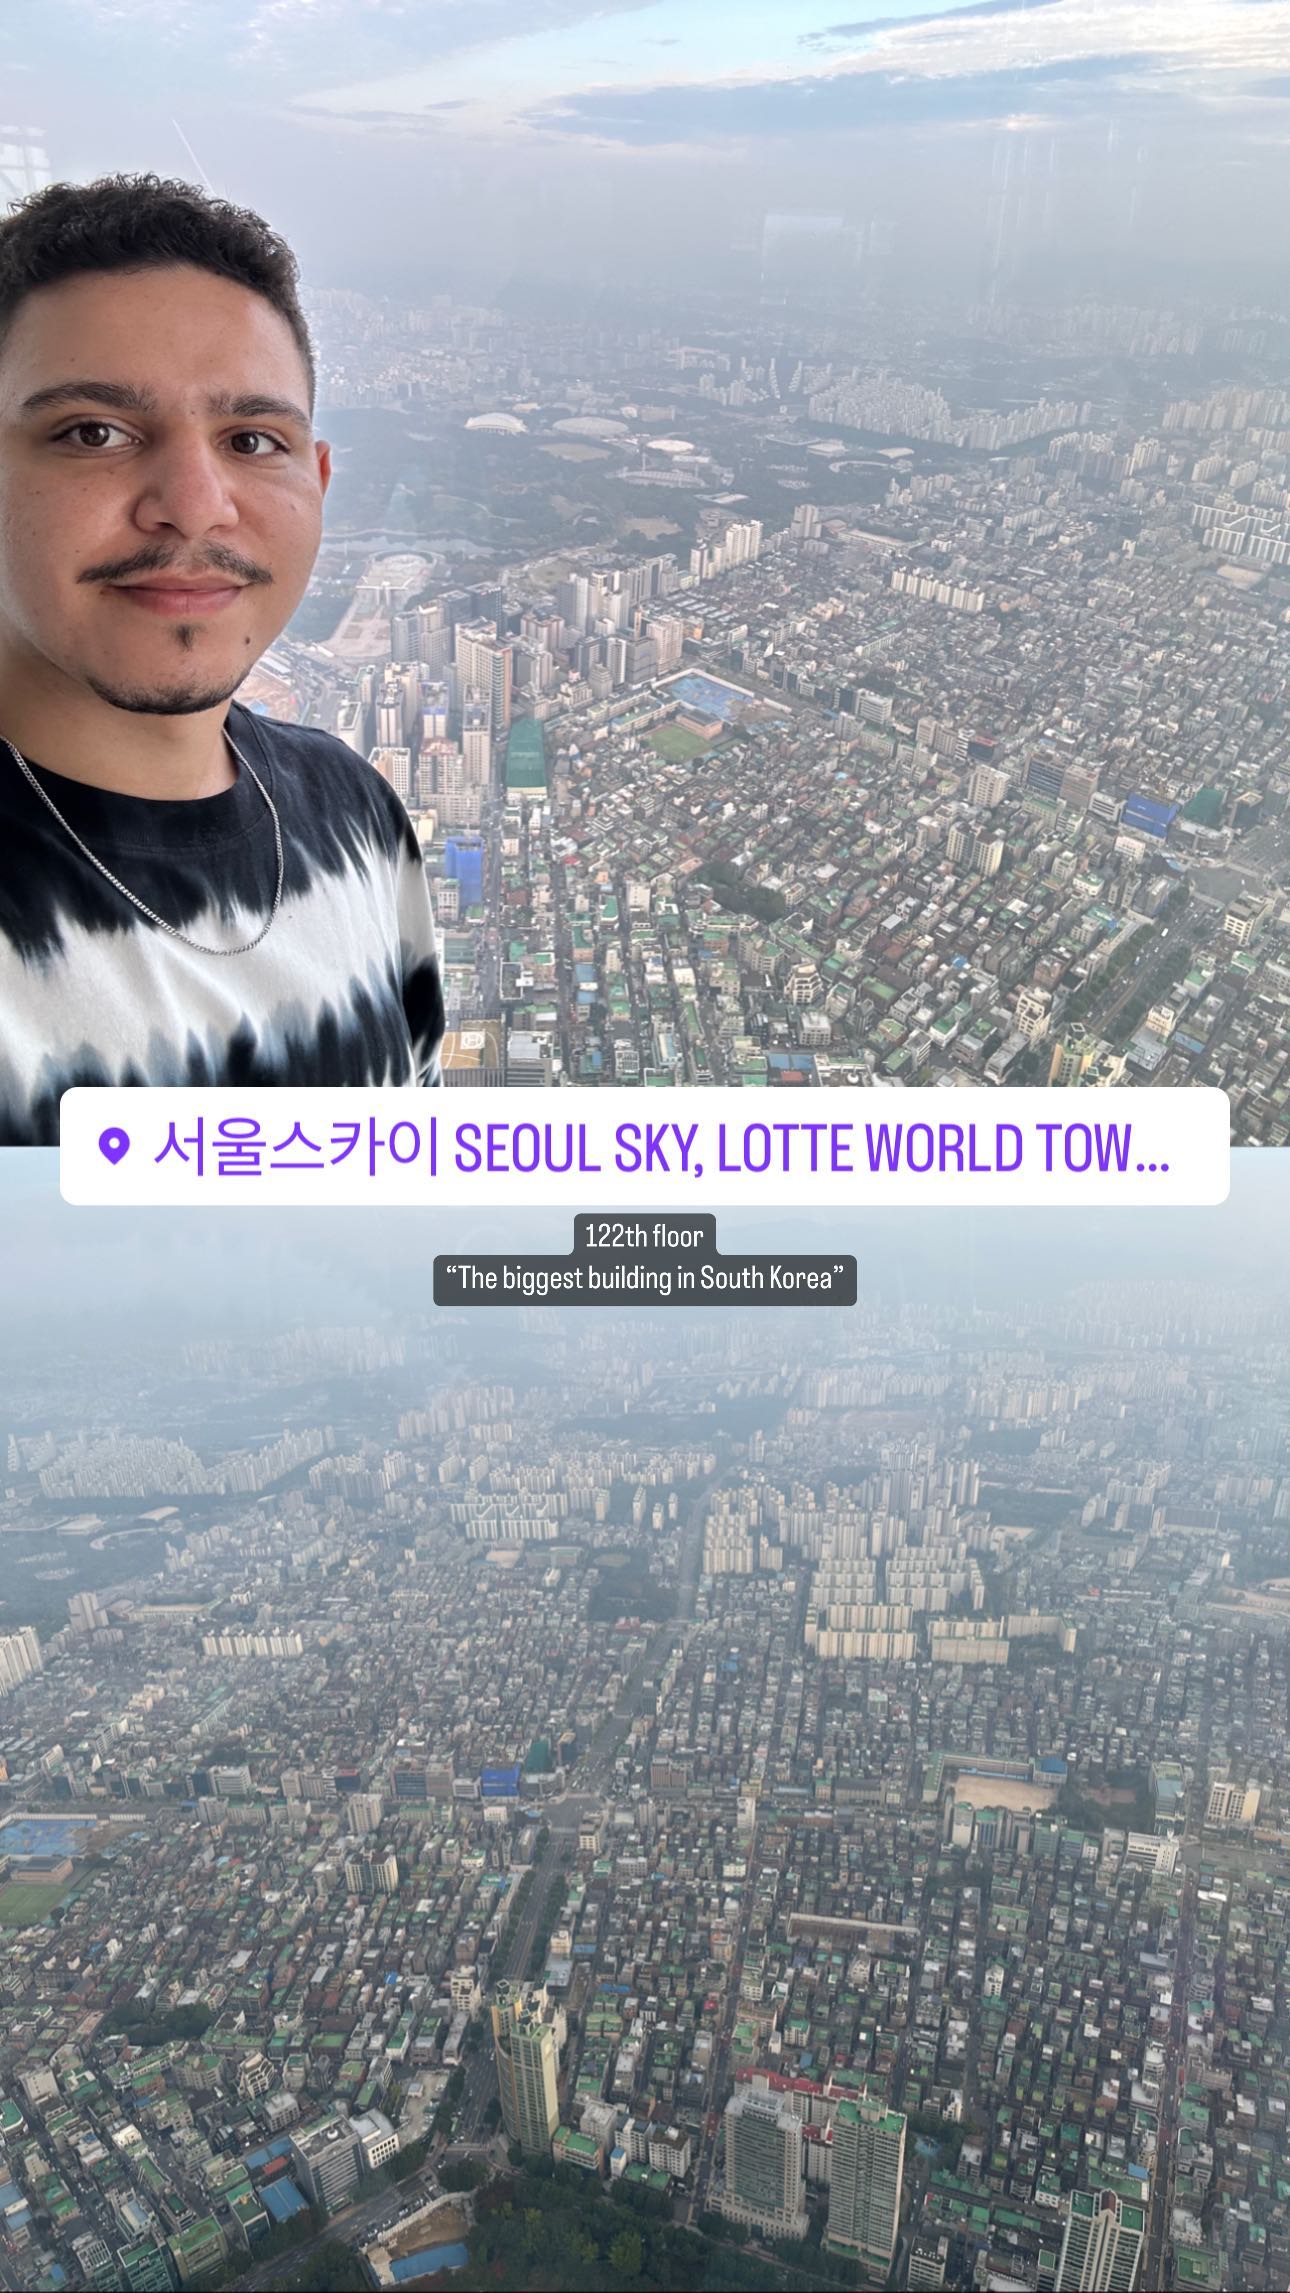 122th floor "The biggest building in South Korea"